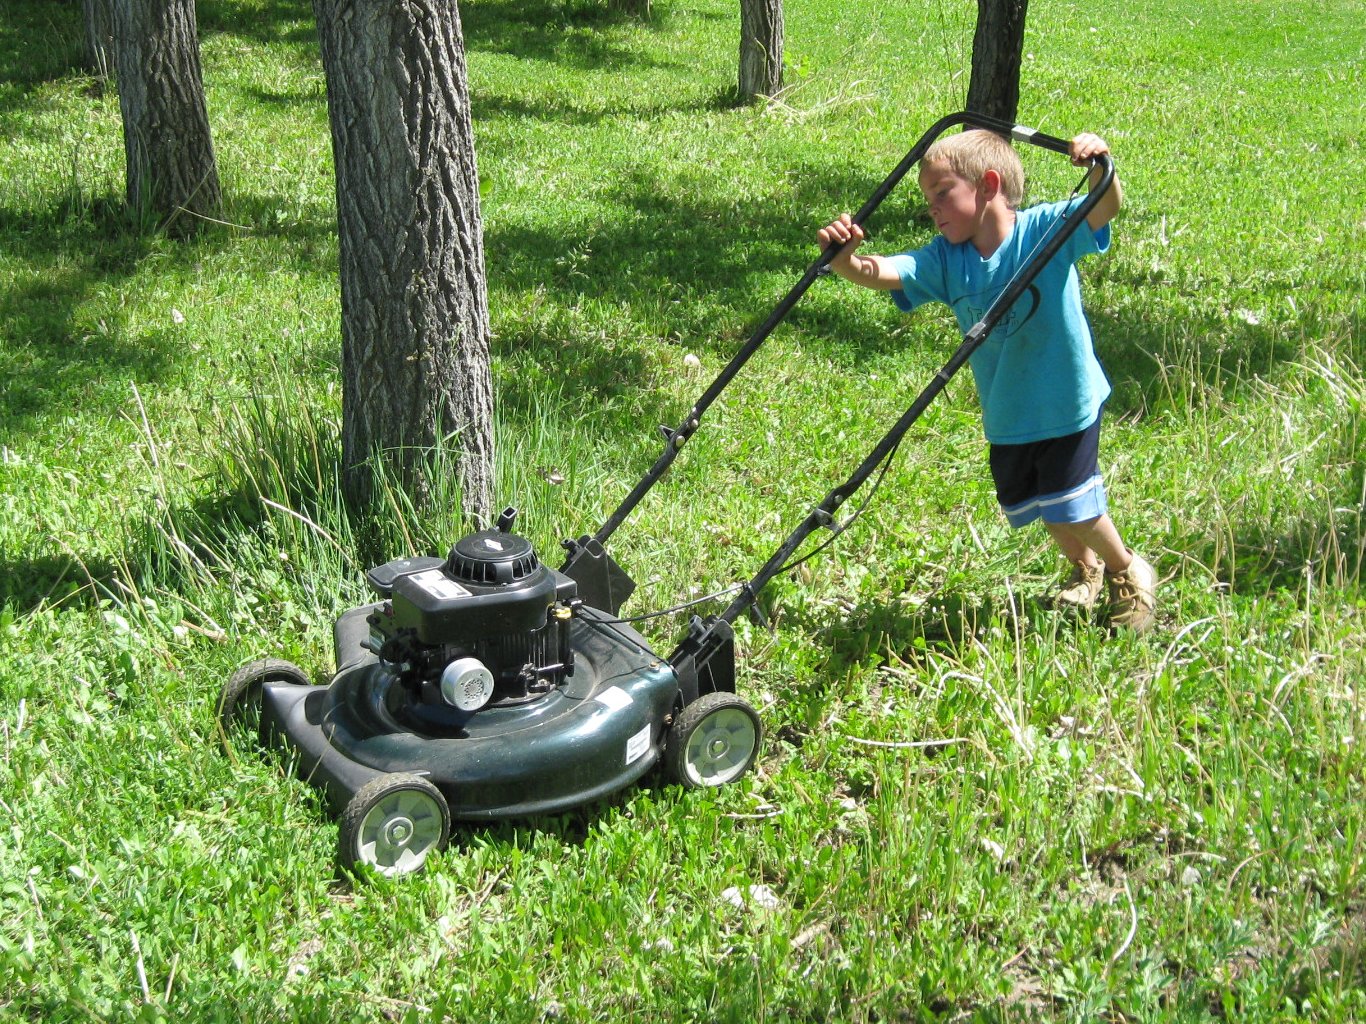 Can We Guess Your Age Based on the Life Skills You Have? mowing the lawn